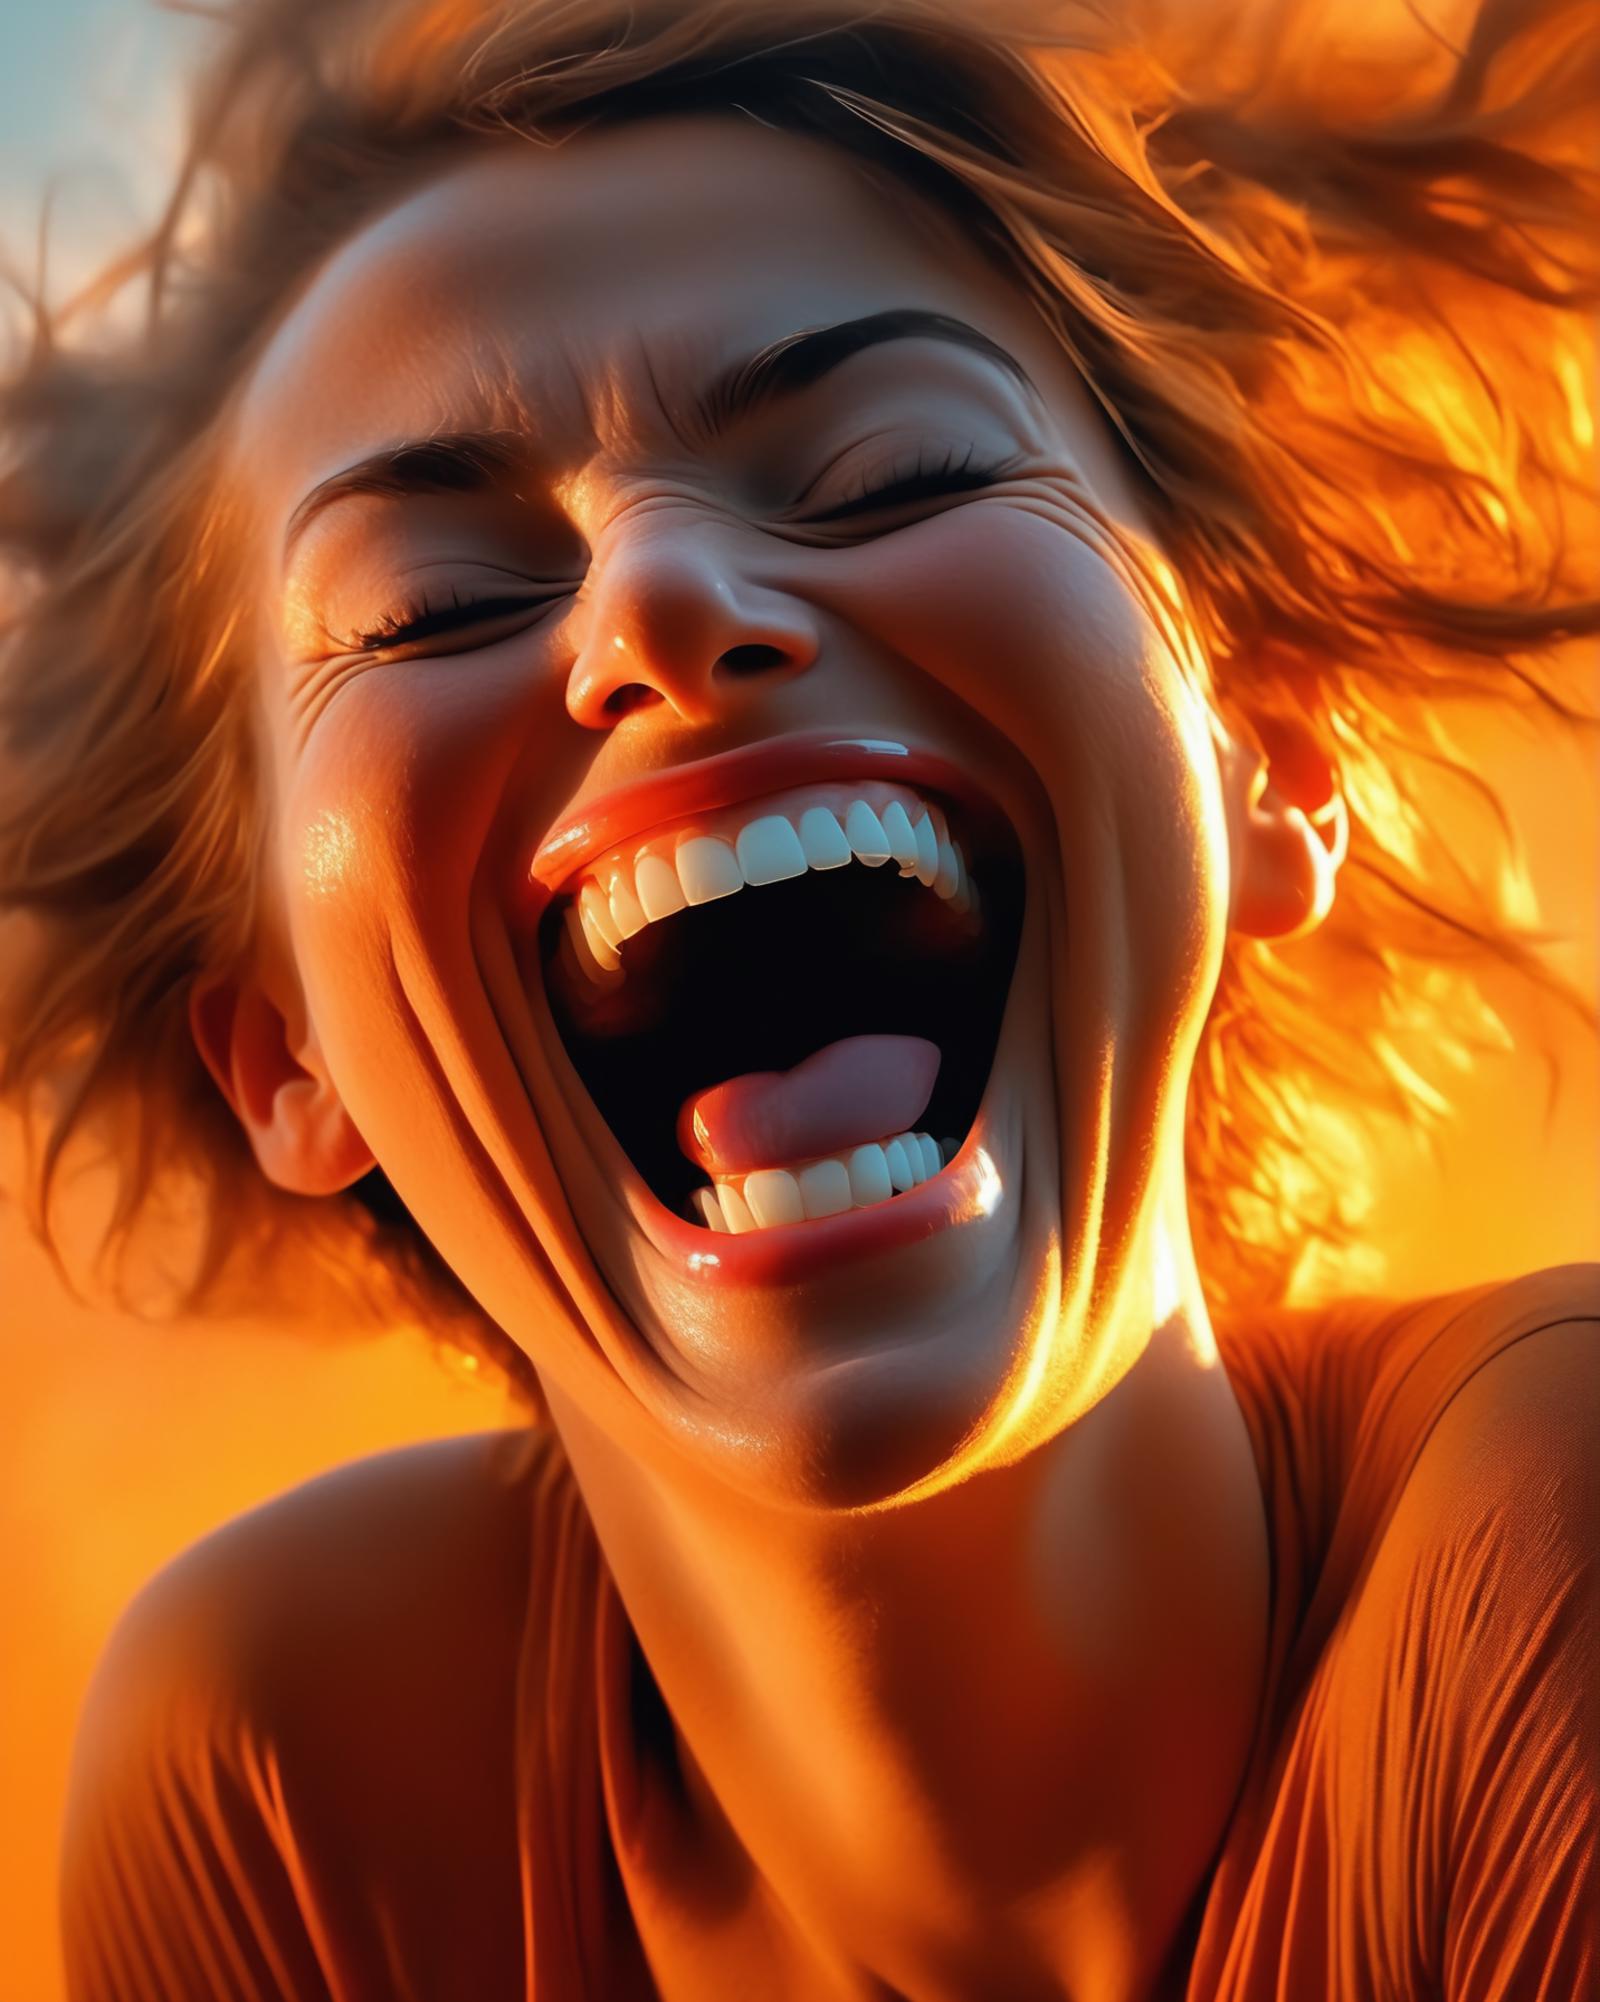 A woman with her mouth wide open laughing.